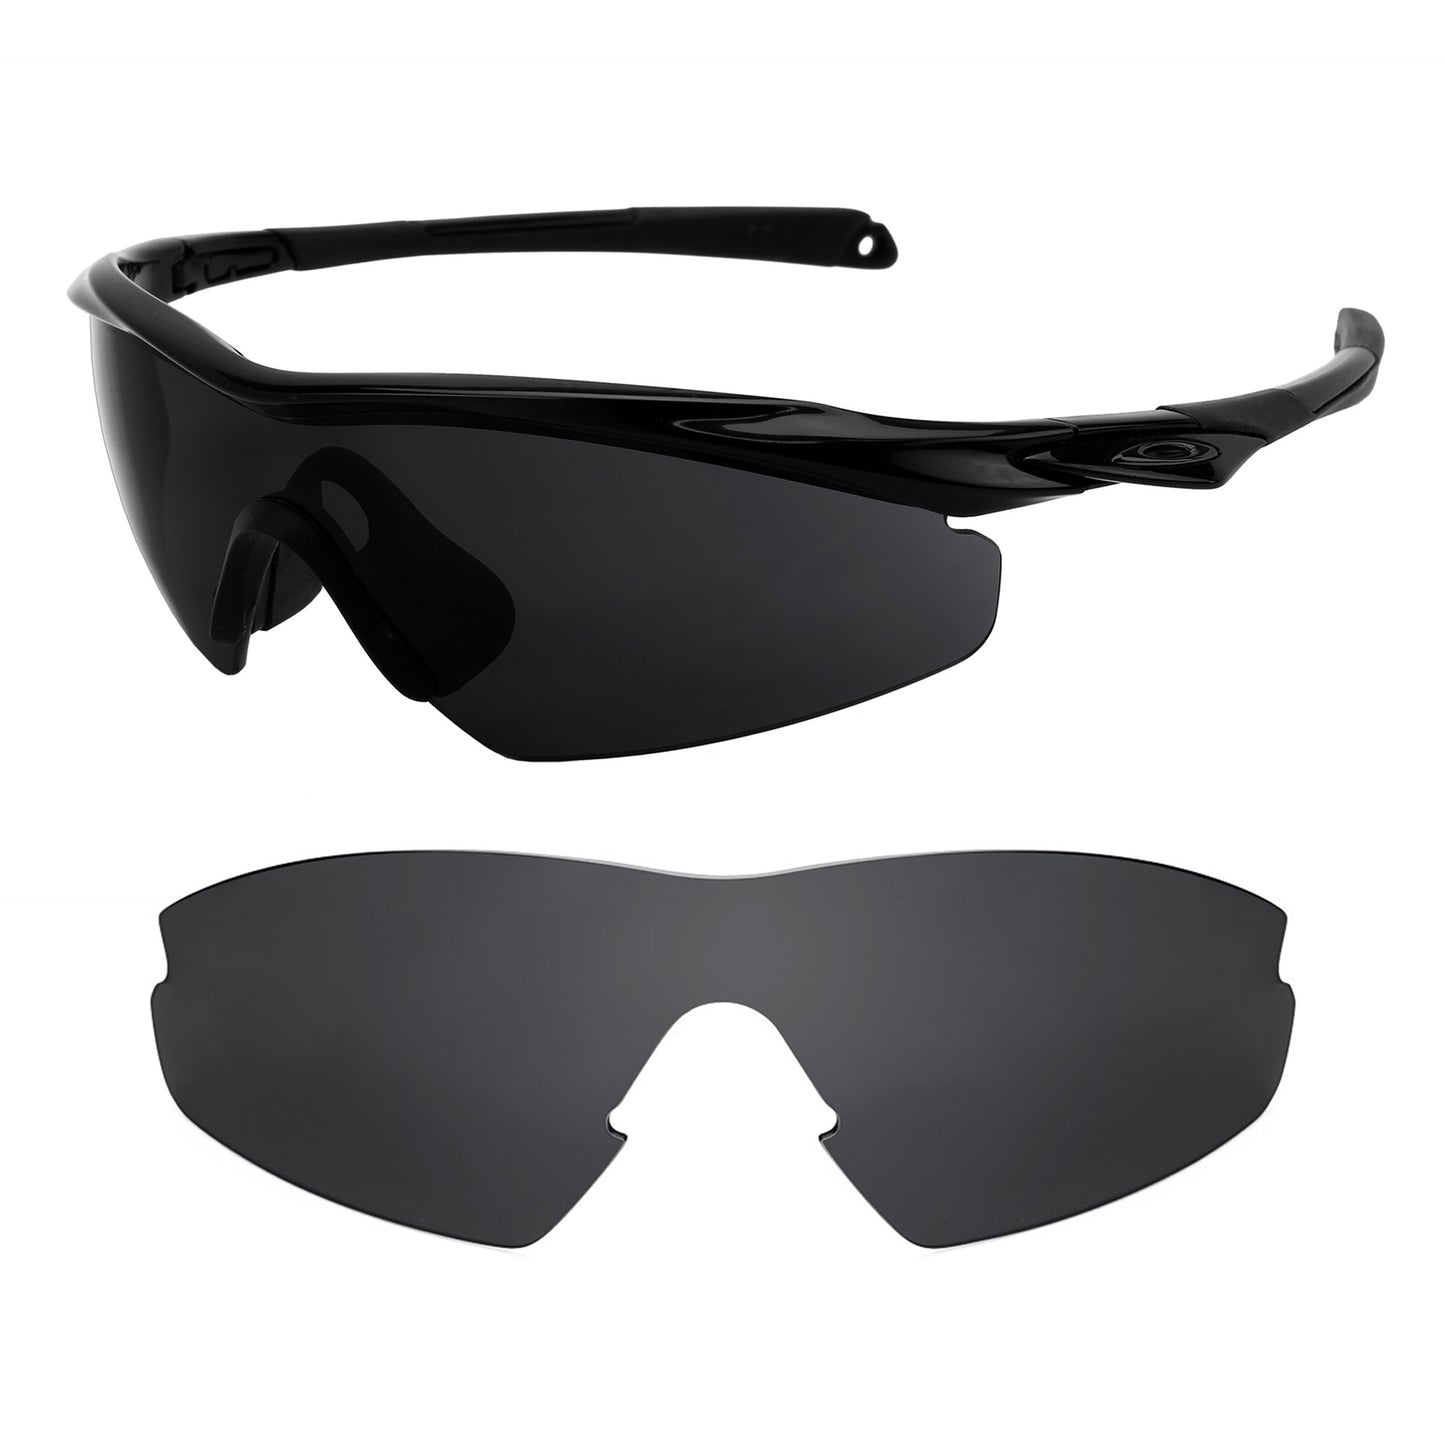 Oakley M2 (Aero) sunglasses with replacement lenses